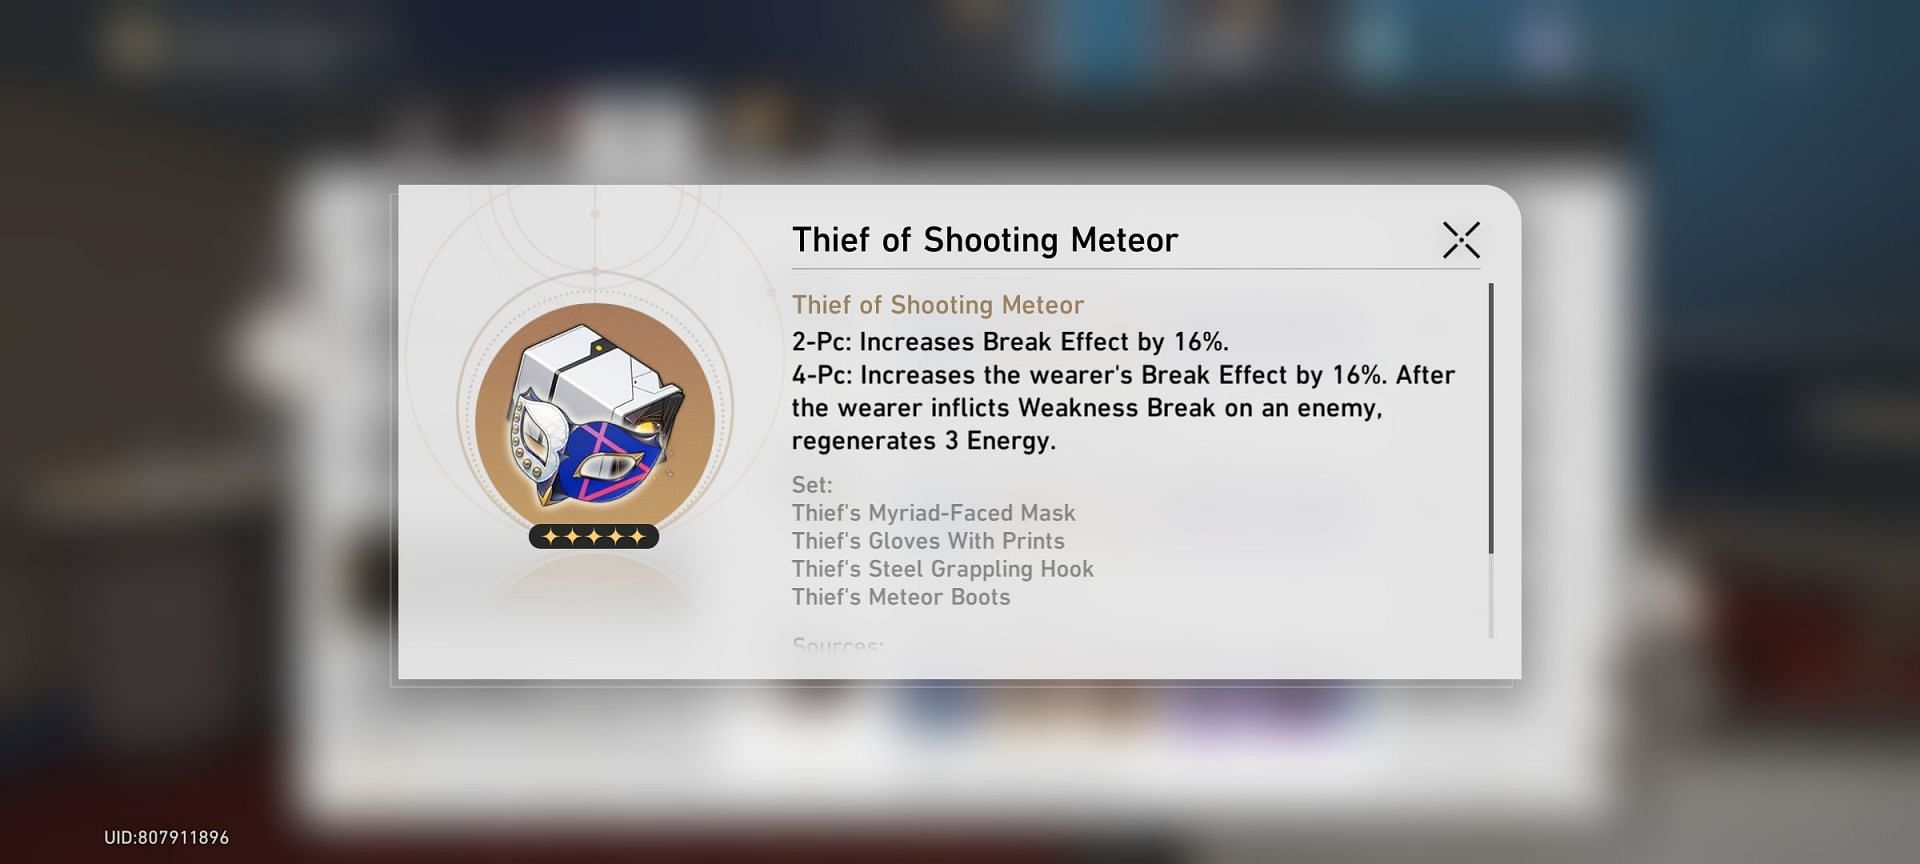 Thief of Shooting Meteor, a relic set in Star Rail (Image via HoYoverse)